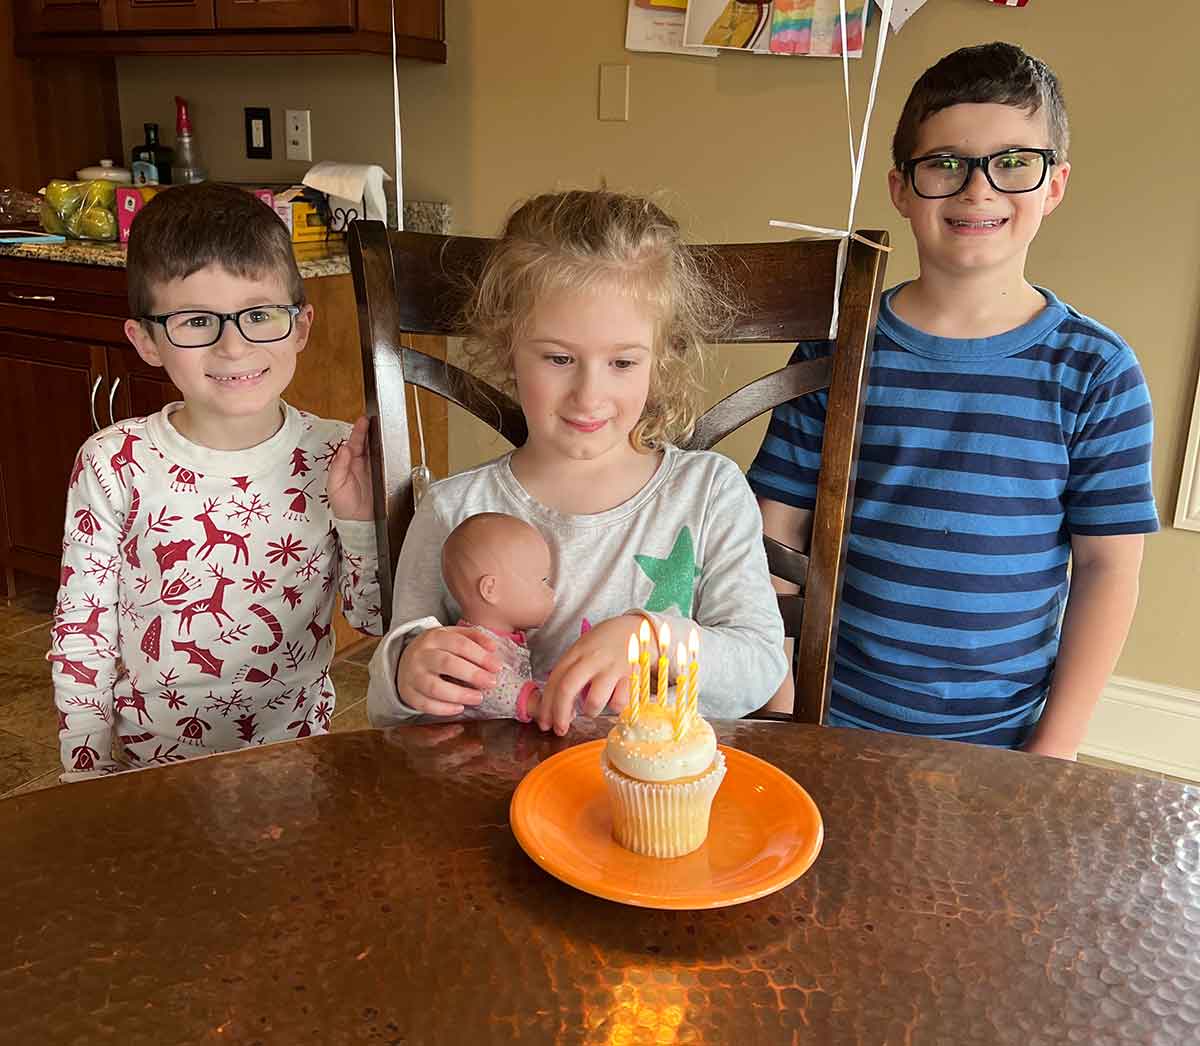 Two boys standing on either side of a girl with a baby doll, preparing to blow out birthday candles.